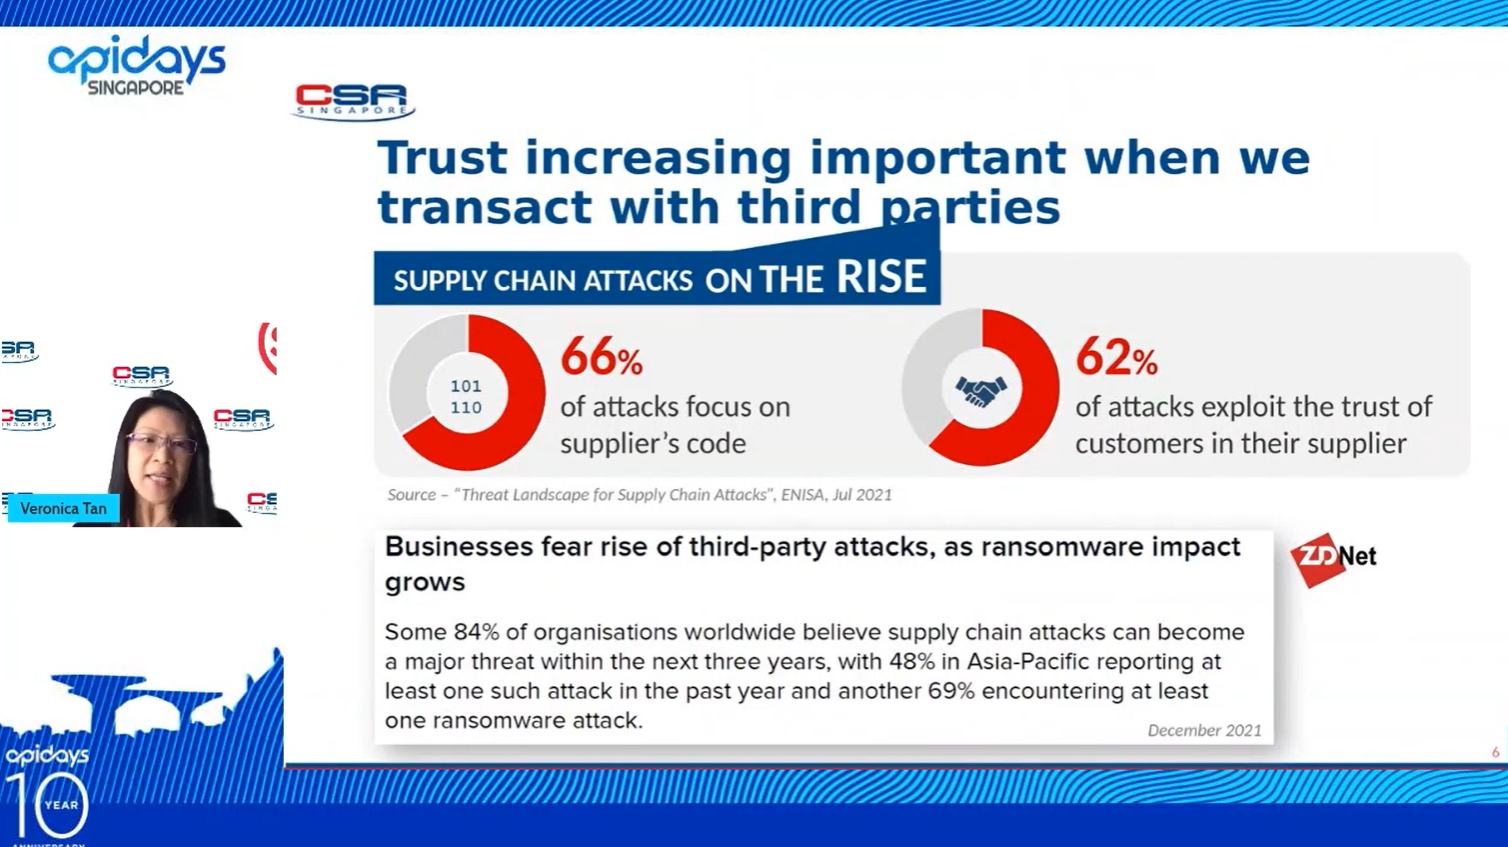 Supply chain attacks on the rise